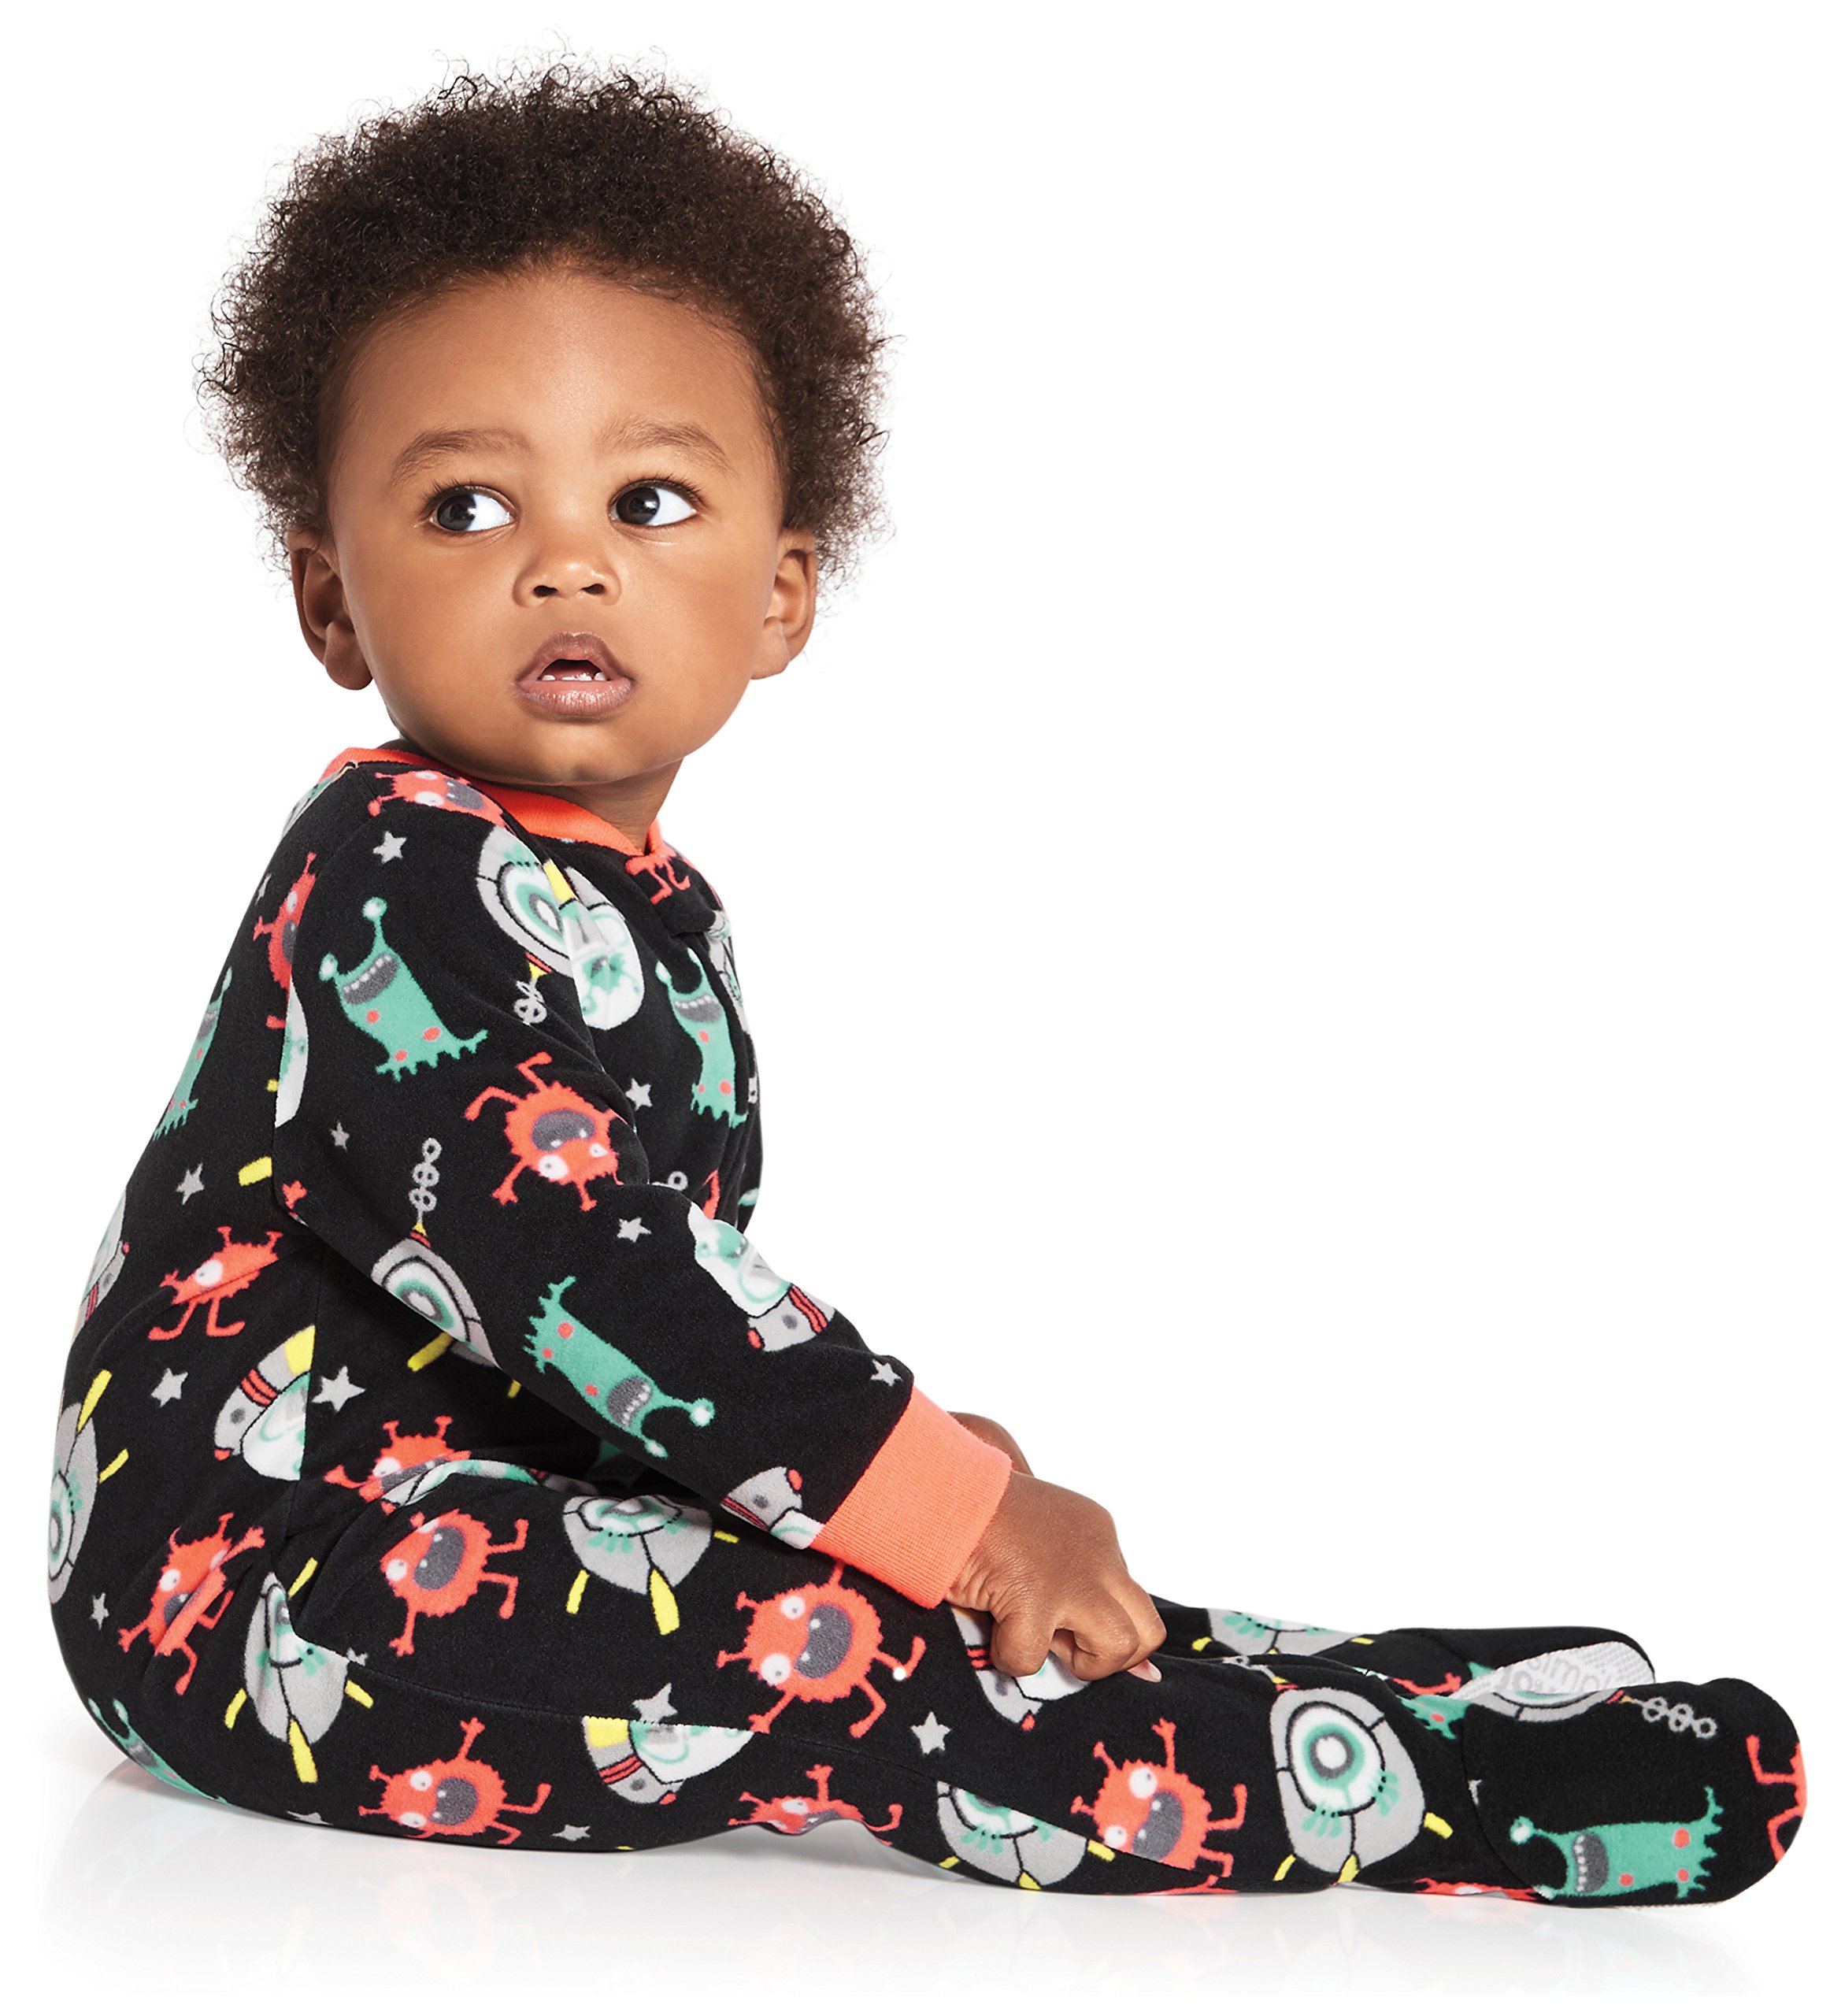 Simple Joys by Carter's Toddlers and Baby Boys' Loose-Fit Flame Resistant Fleece Footed Pajamas, Pack of 3